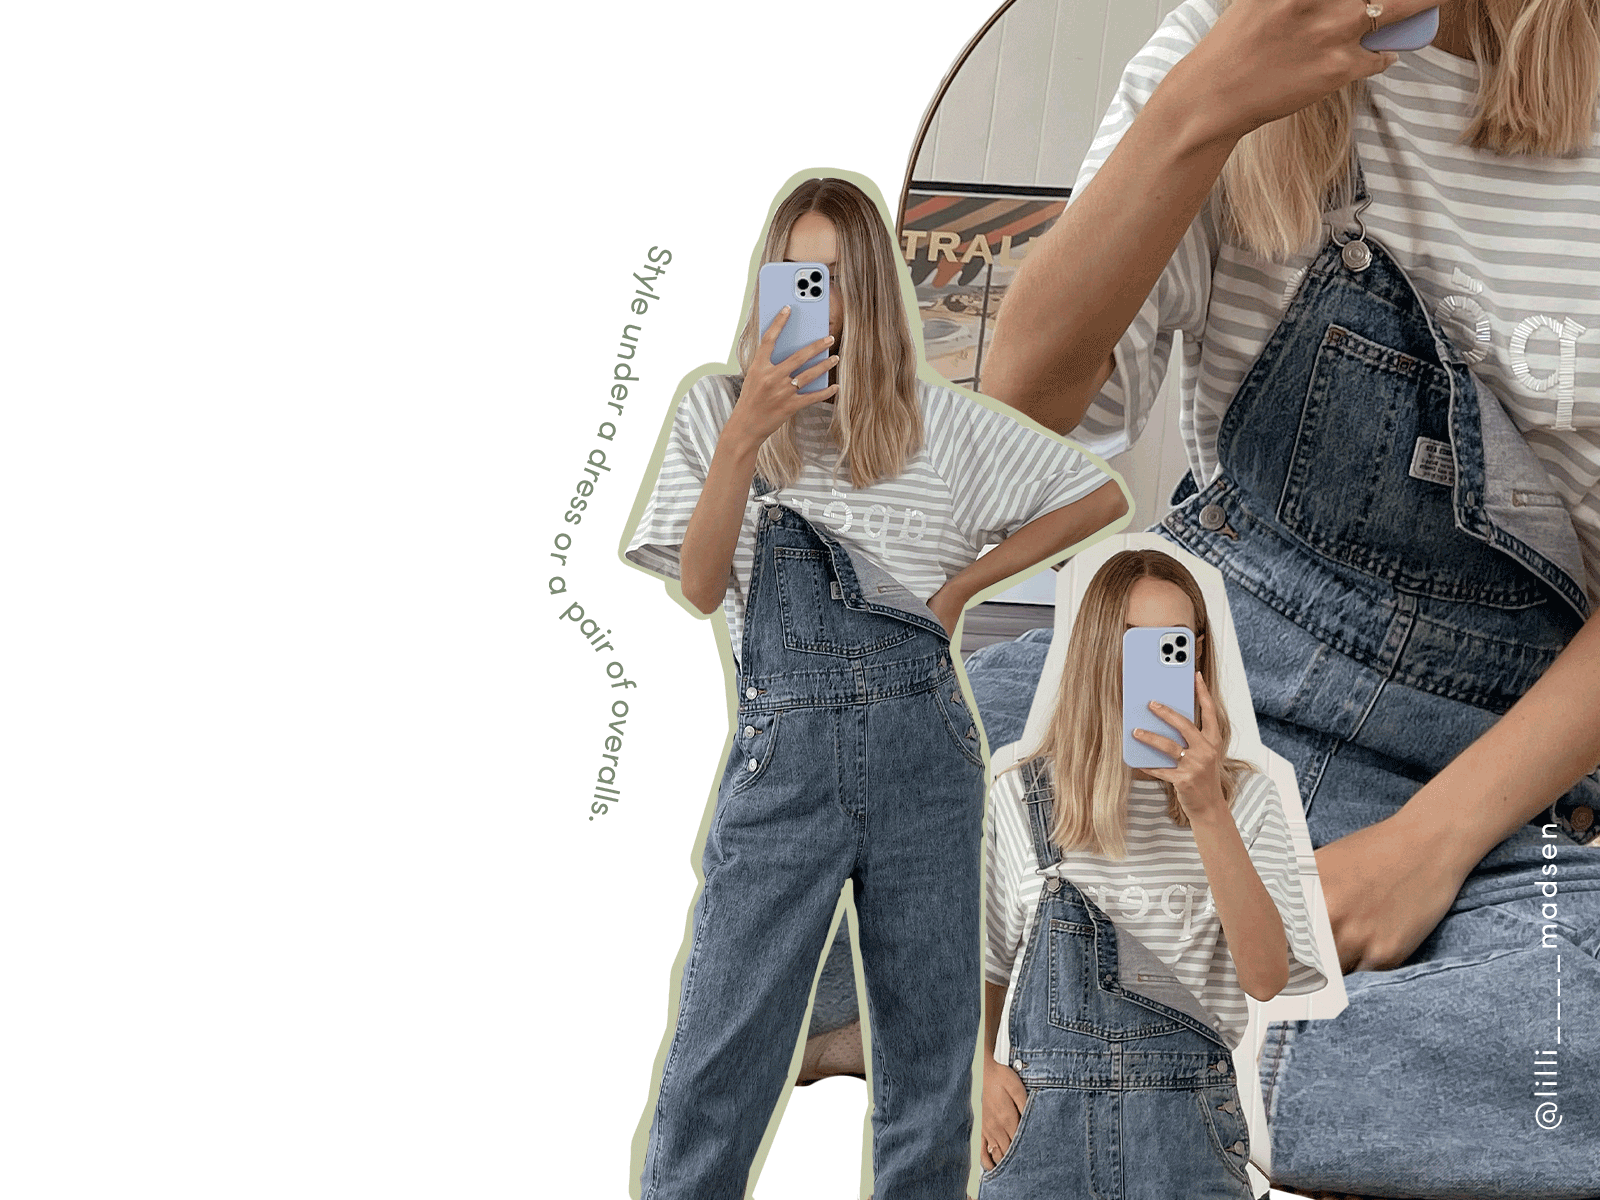 Layer overalls over the top